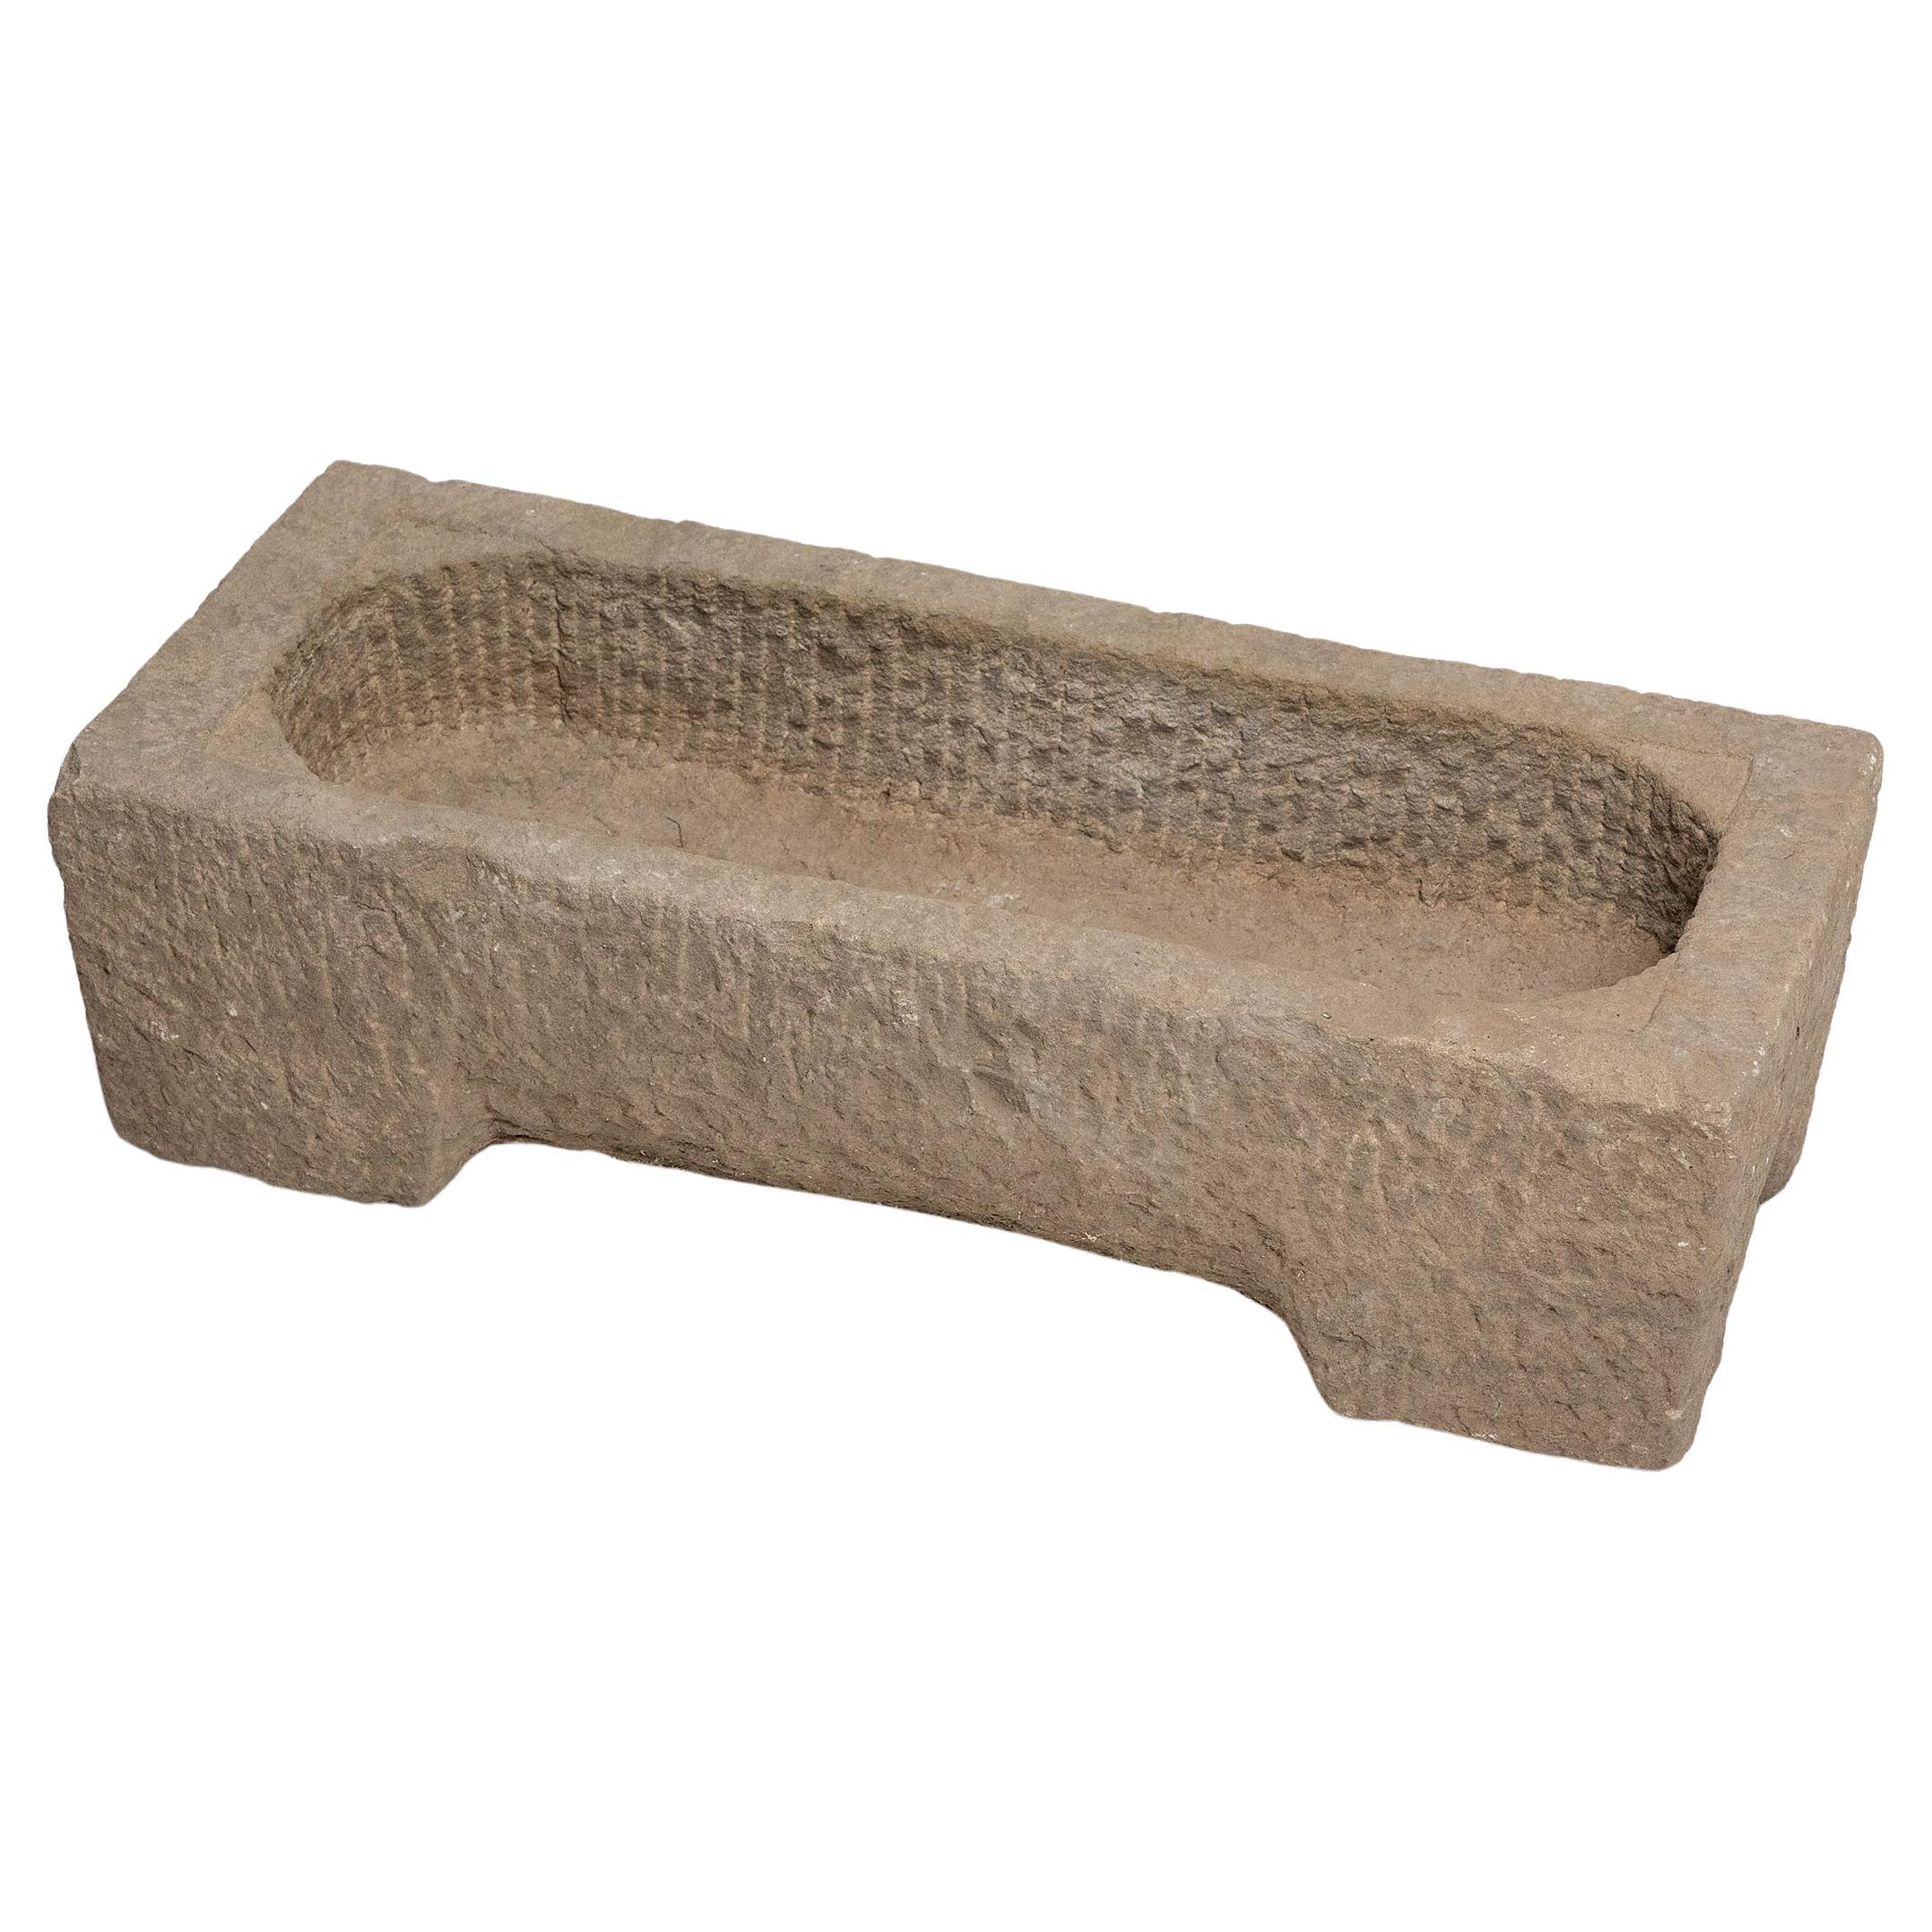 Footed Chinese Stone Water Trough, c. 1900